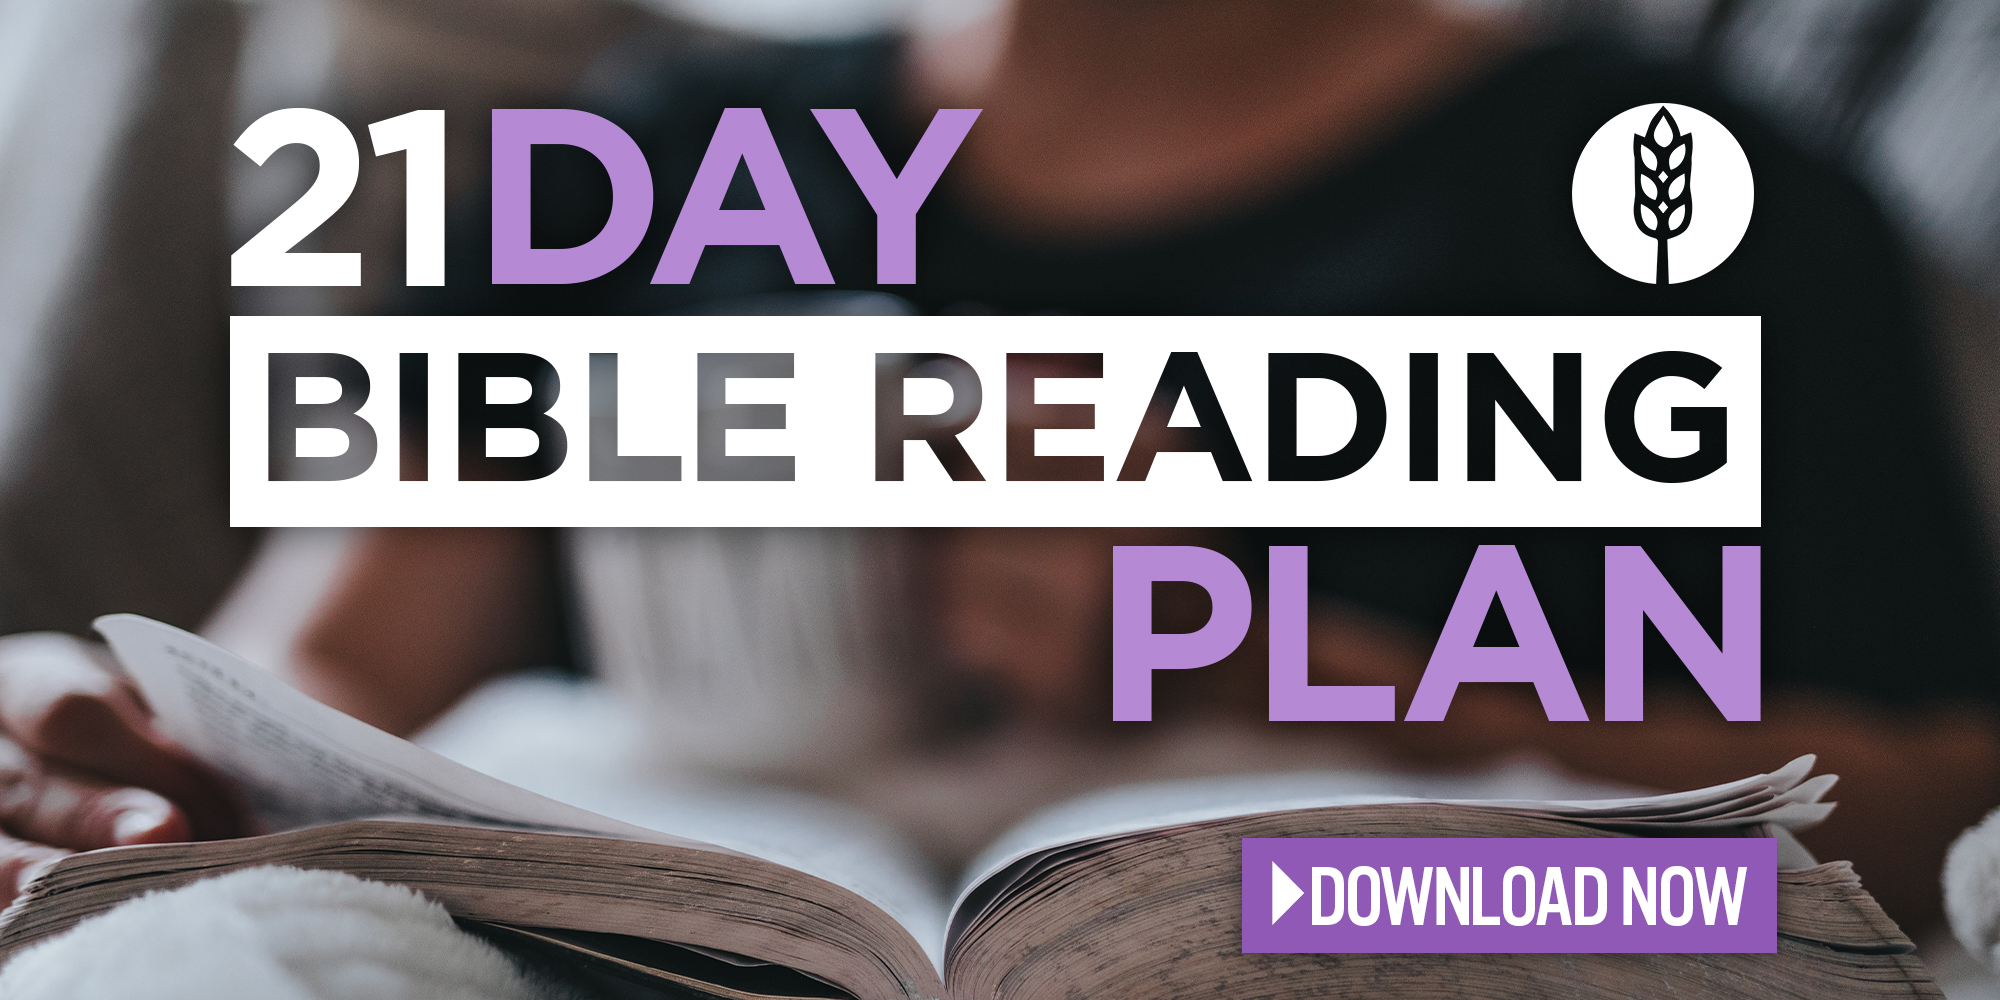 21 Day Bible Reading Plan Download Now